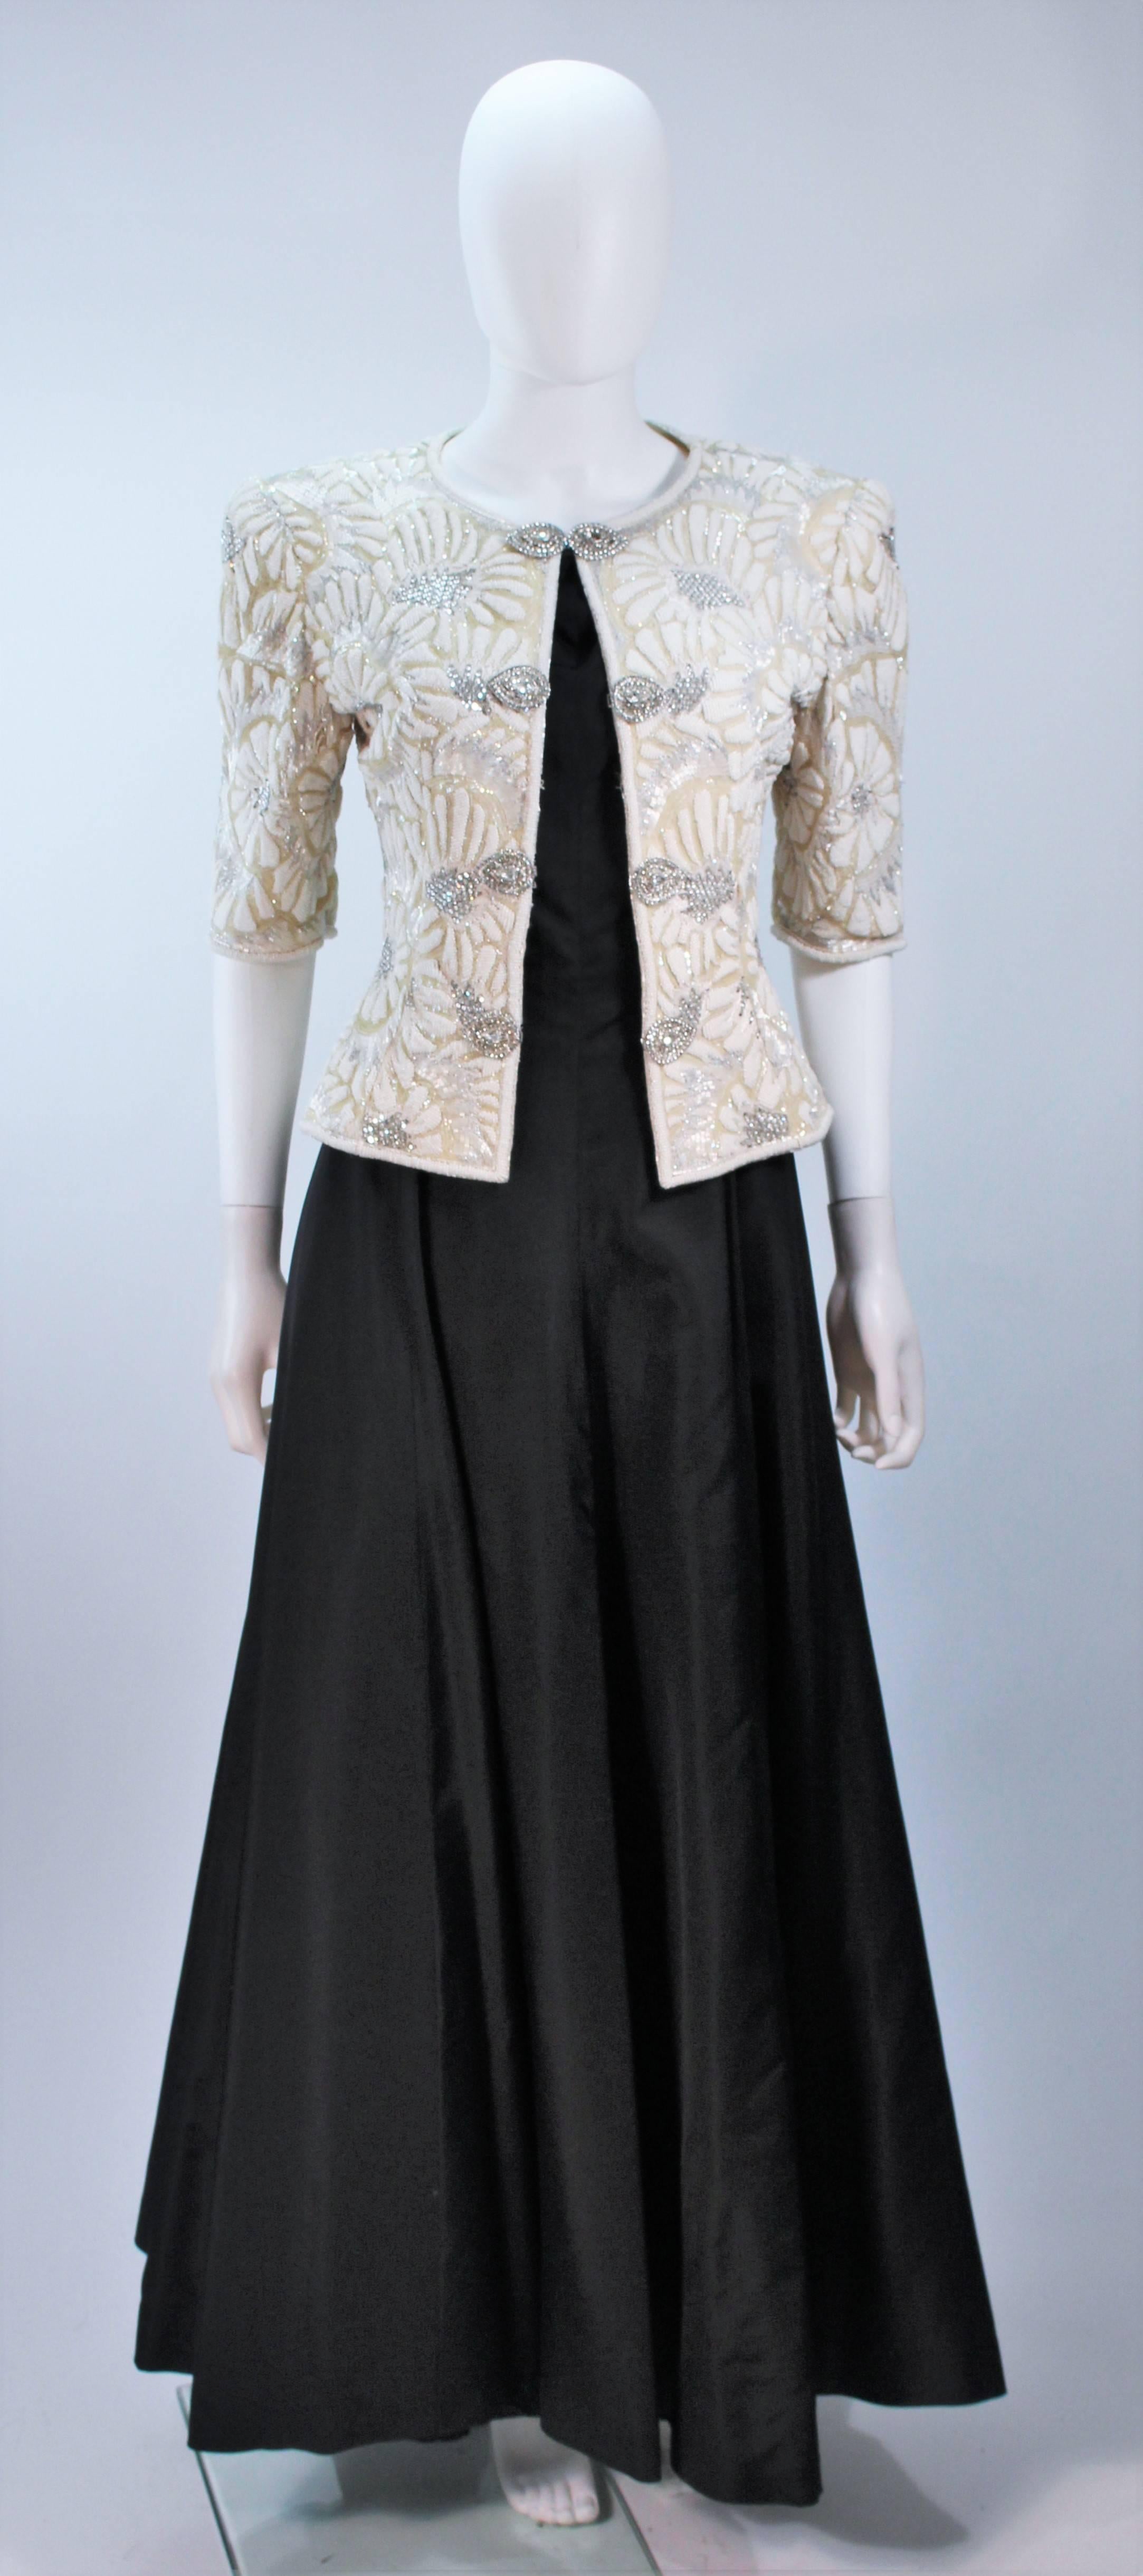  This Oscar de La Renta ensemble features a black satin gown and off white embellished jacket.  The gown features a zipper closure and the jacket has center front closures. In excellent vintage condition. 

  **Please cross-reference measurements